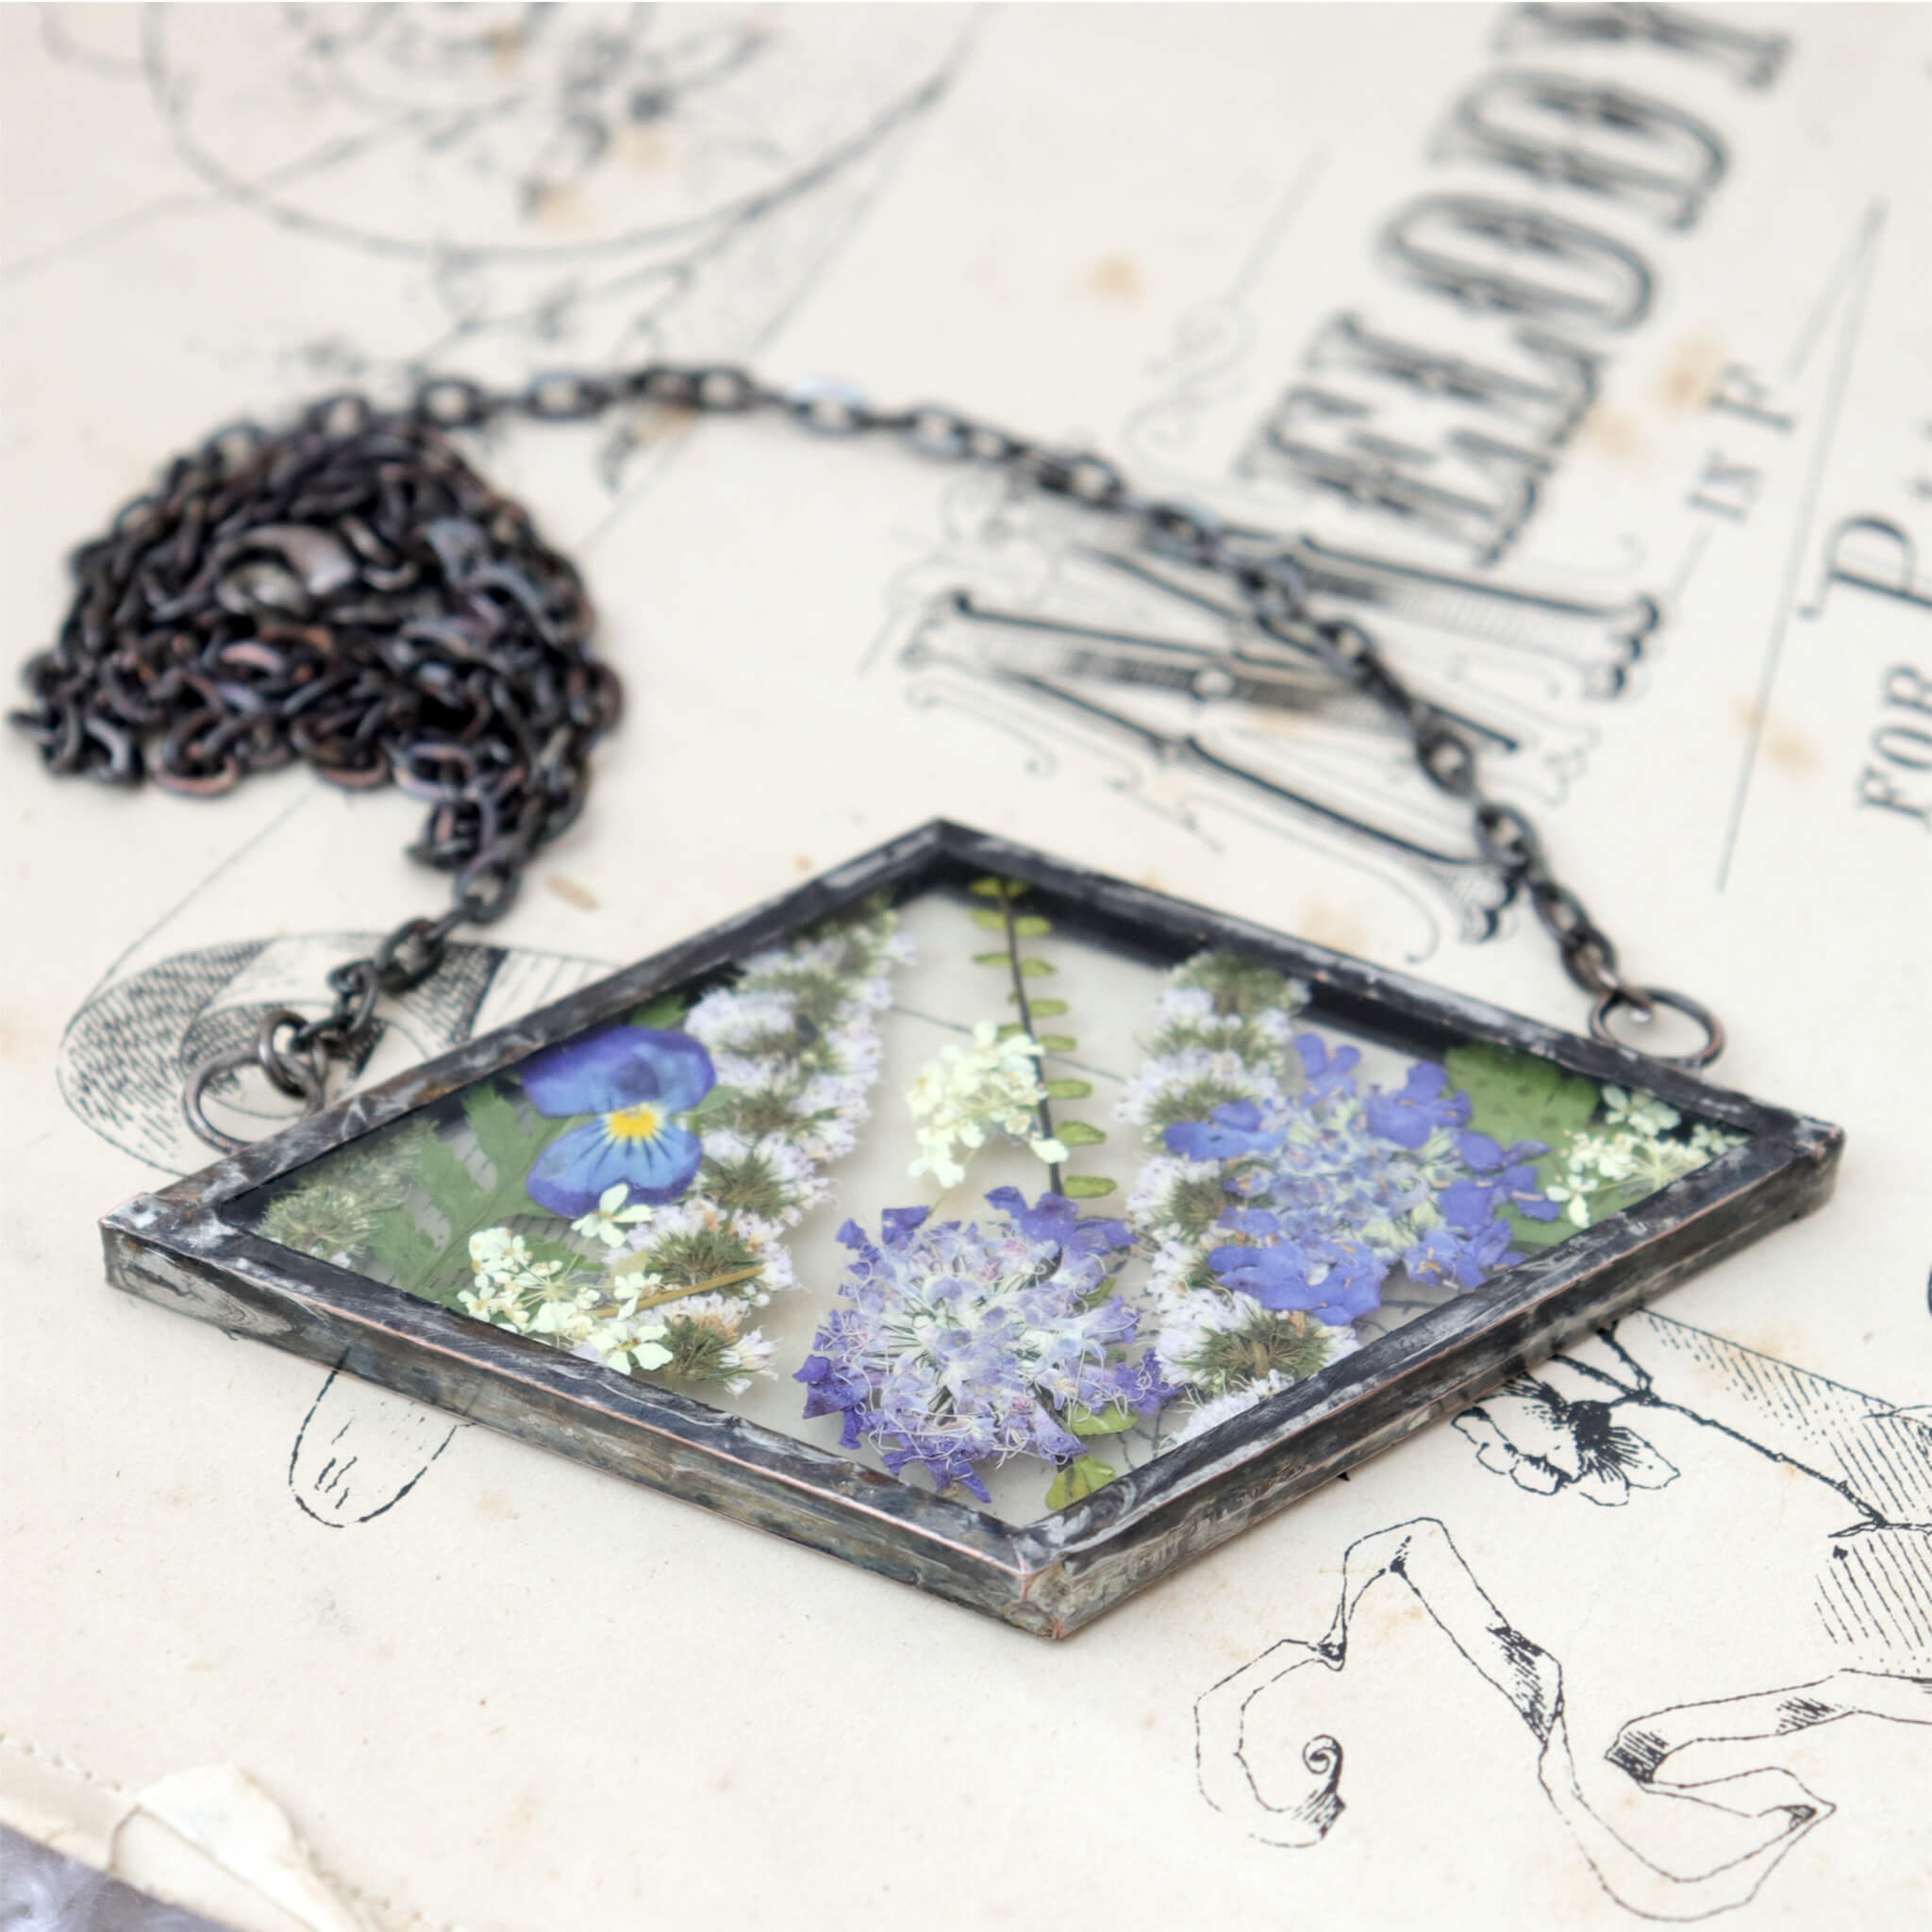 Rhomboidal purple pressed flower necklace lying on an old book